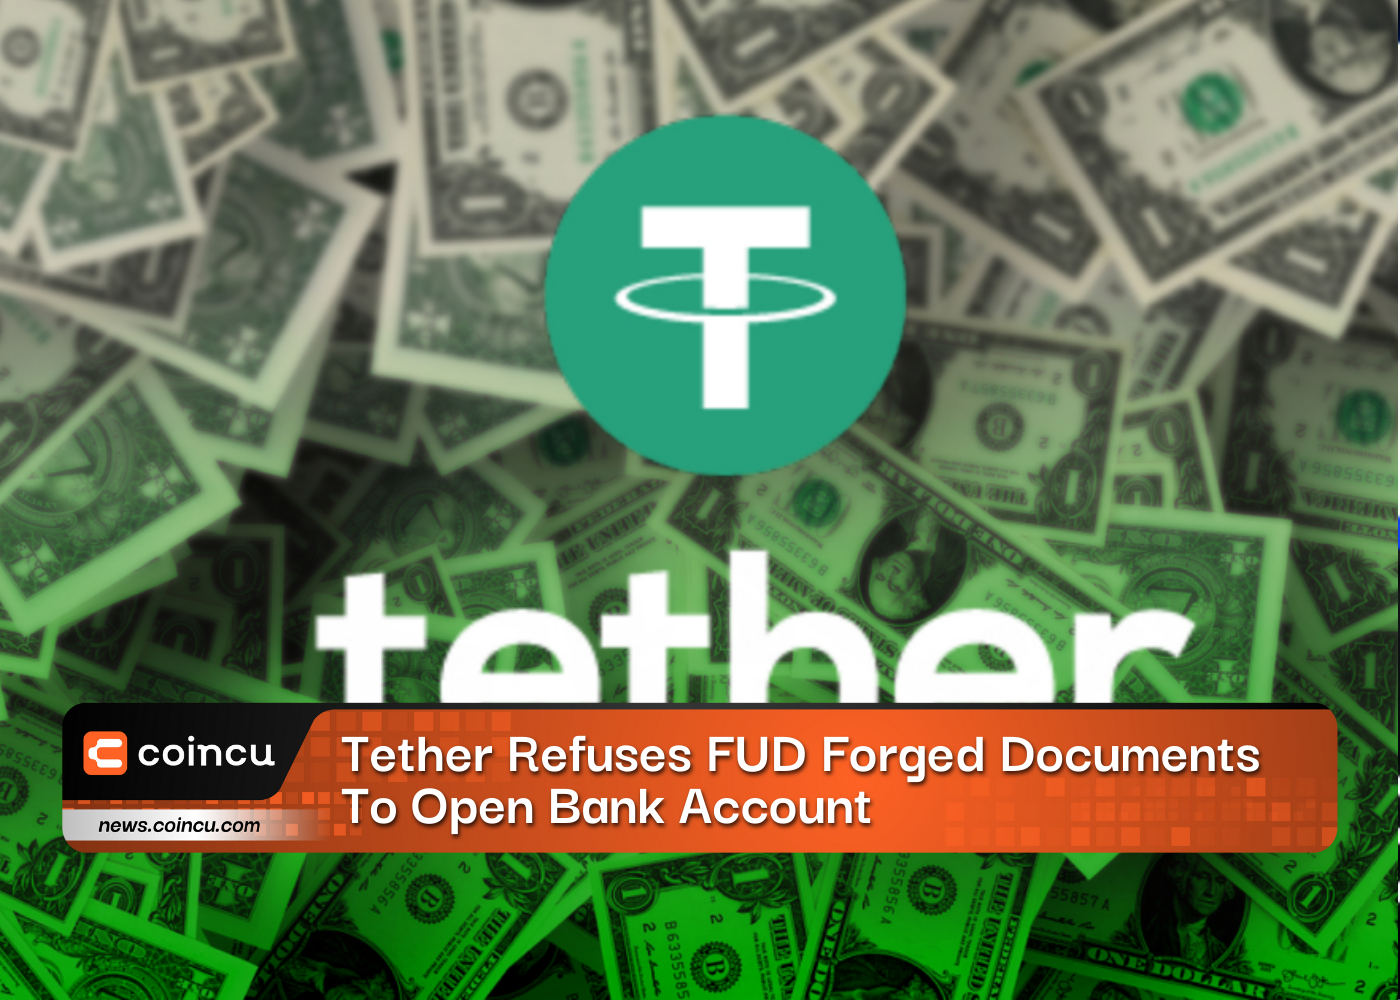 Tether Refuses FUD Forged Documents To Open Bank Account